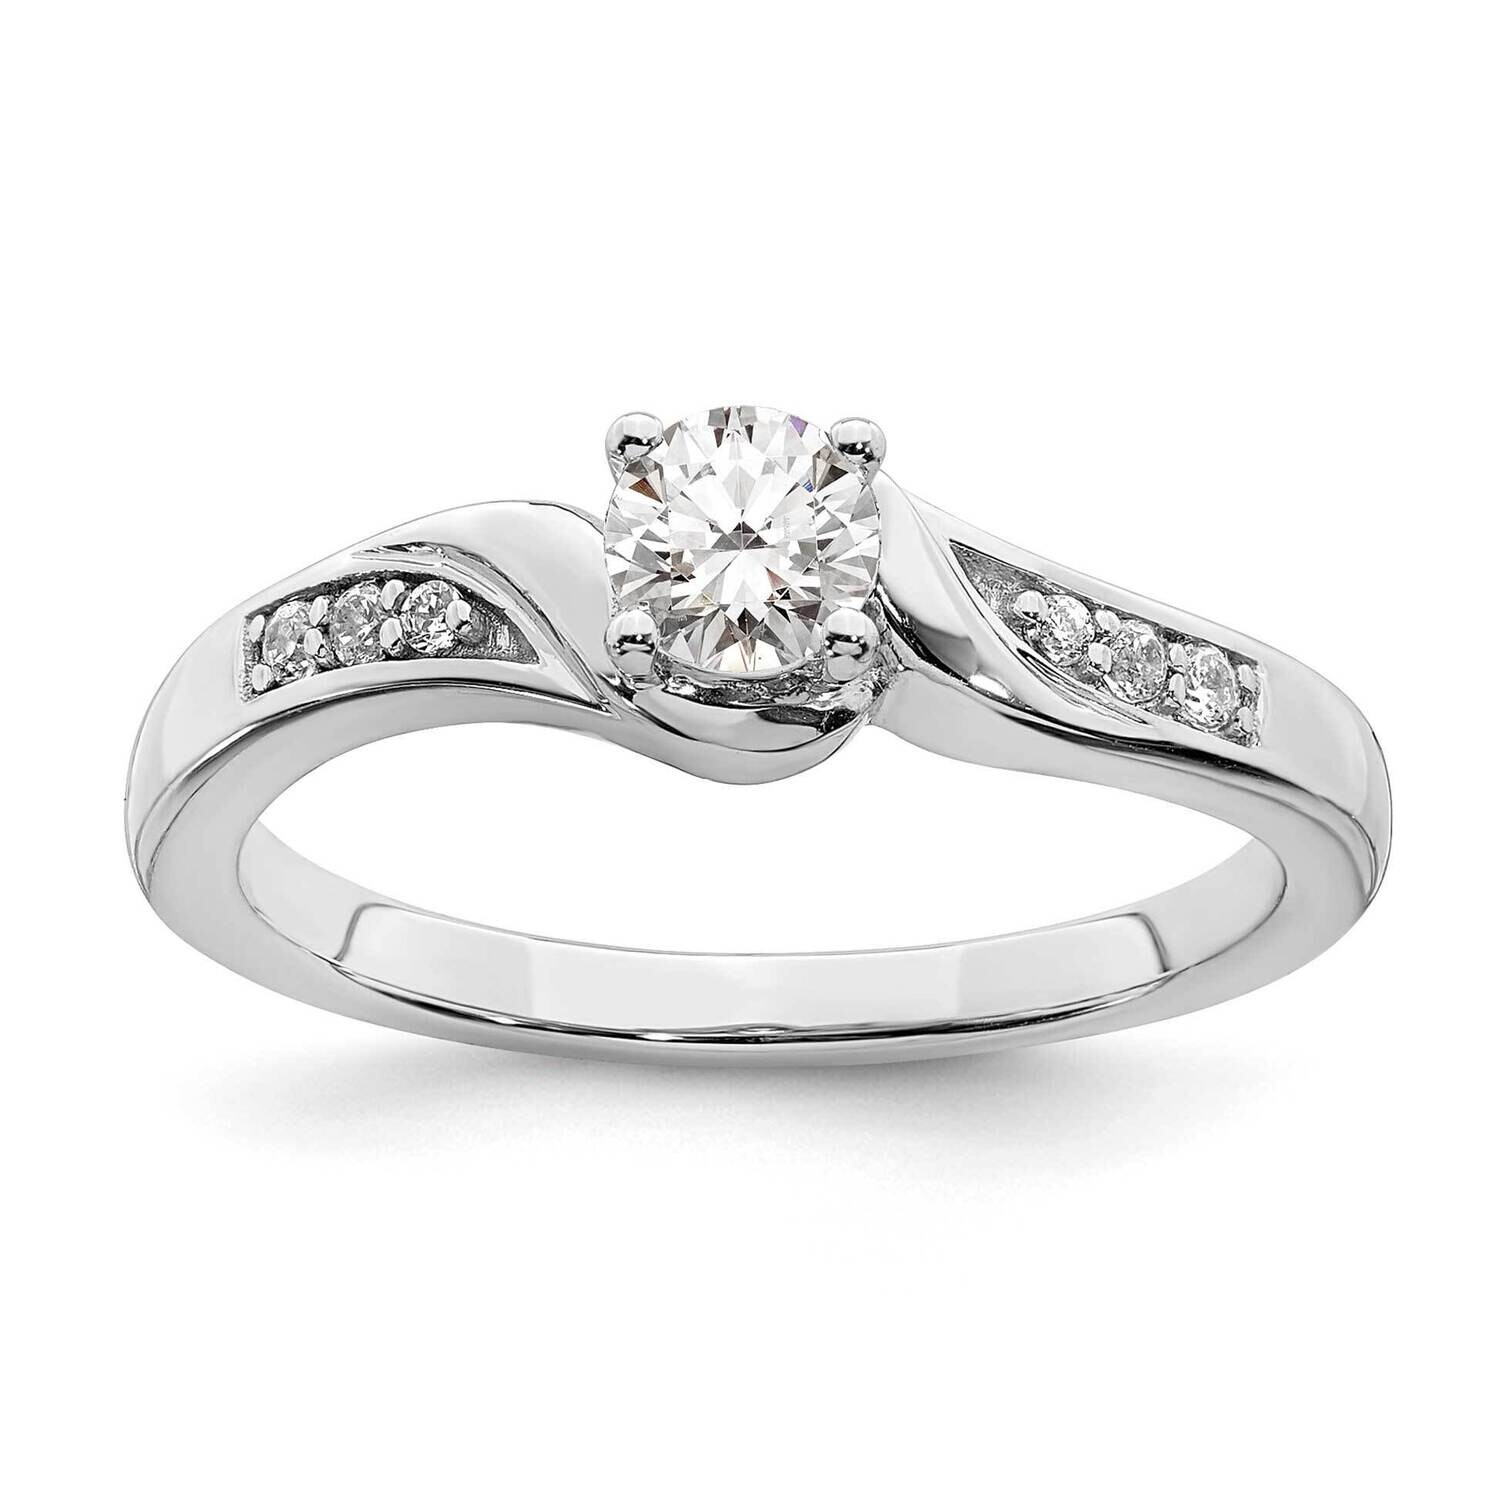 By-Pass Holds 1/3 Carat 4.5mm Round Center 1/20 Carat Diamond Semi-Mount Engagement Ring 14k White Gold RM6433E-033-WAA